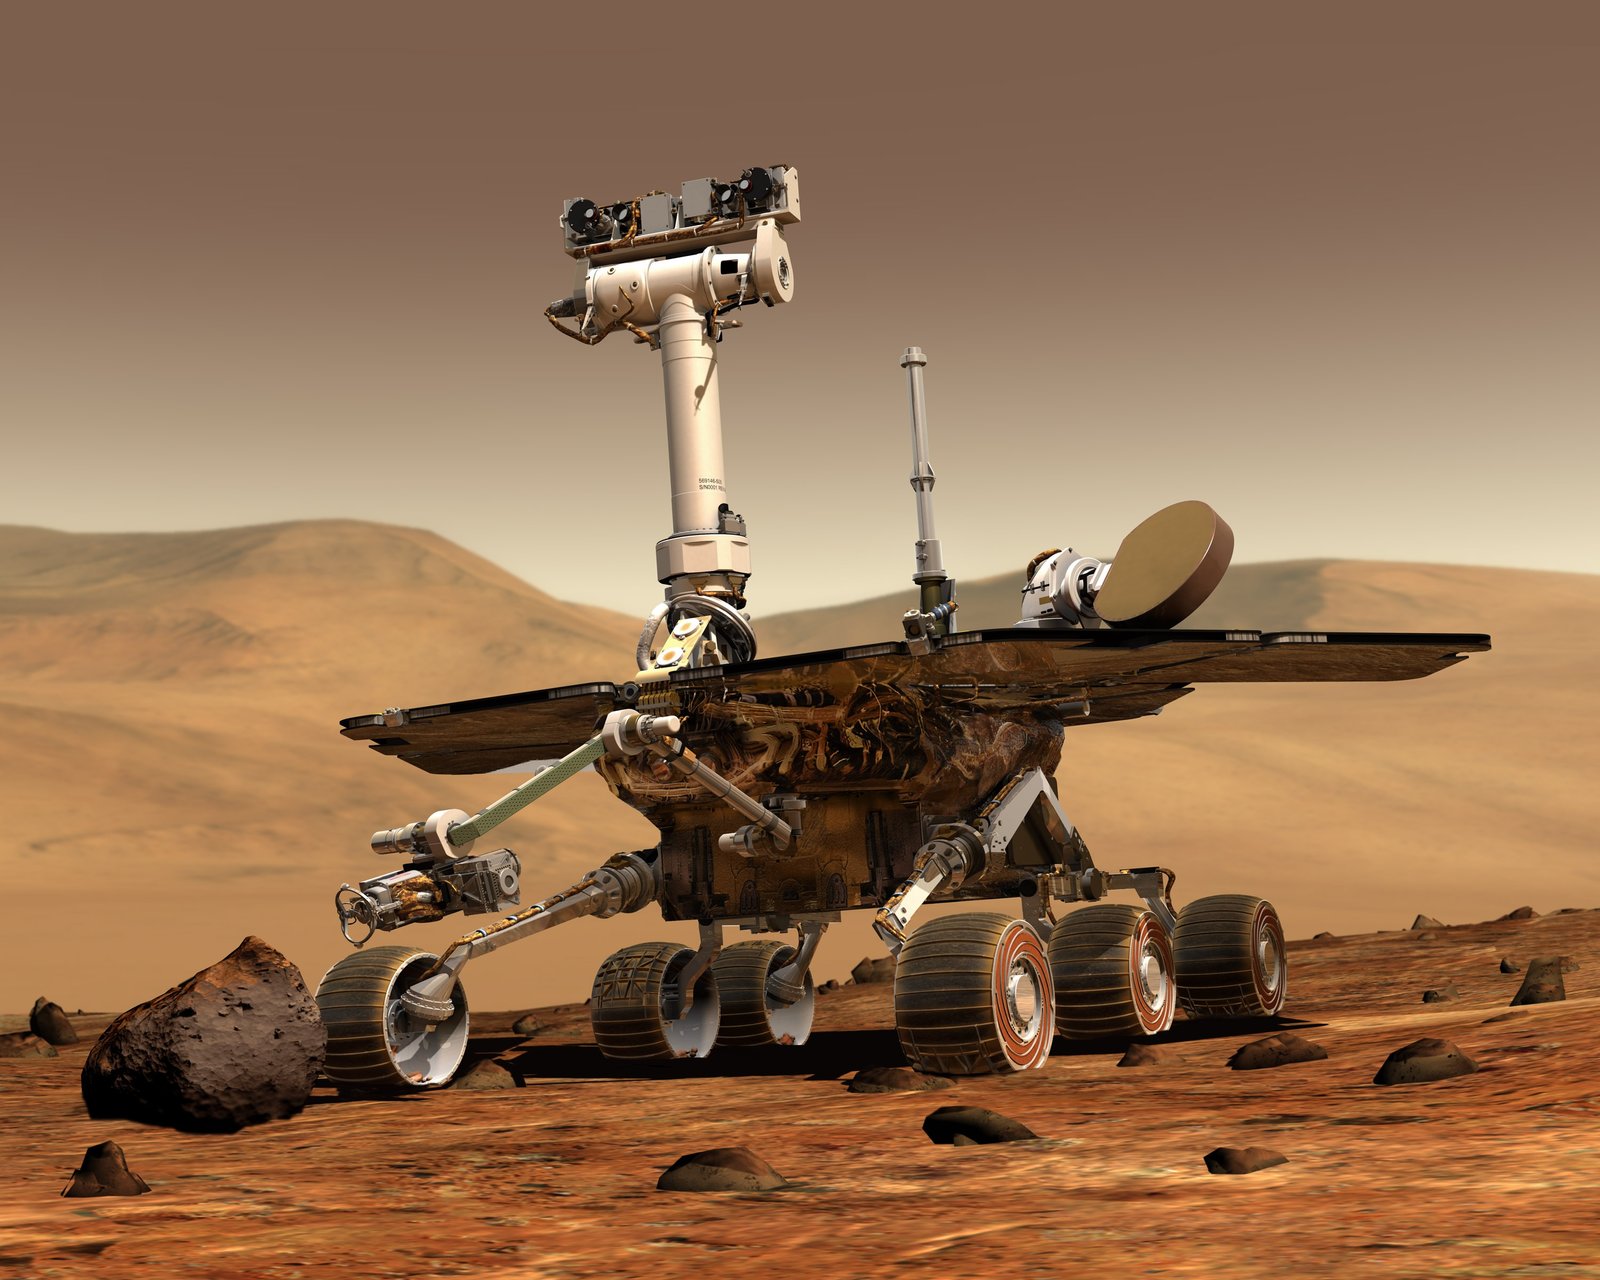 More information about "The Mars Rover"